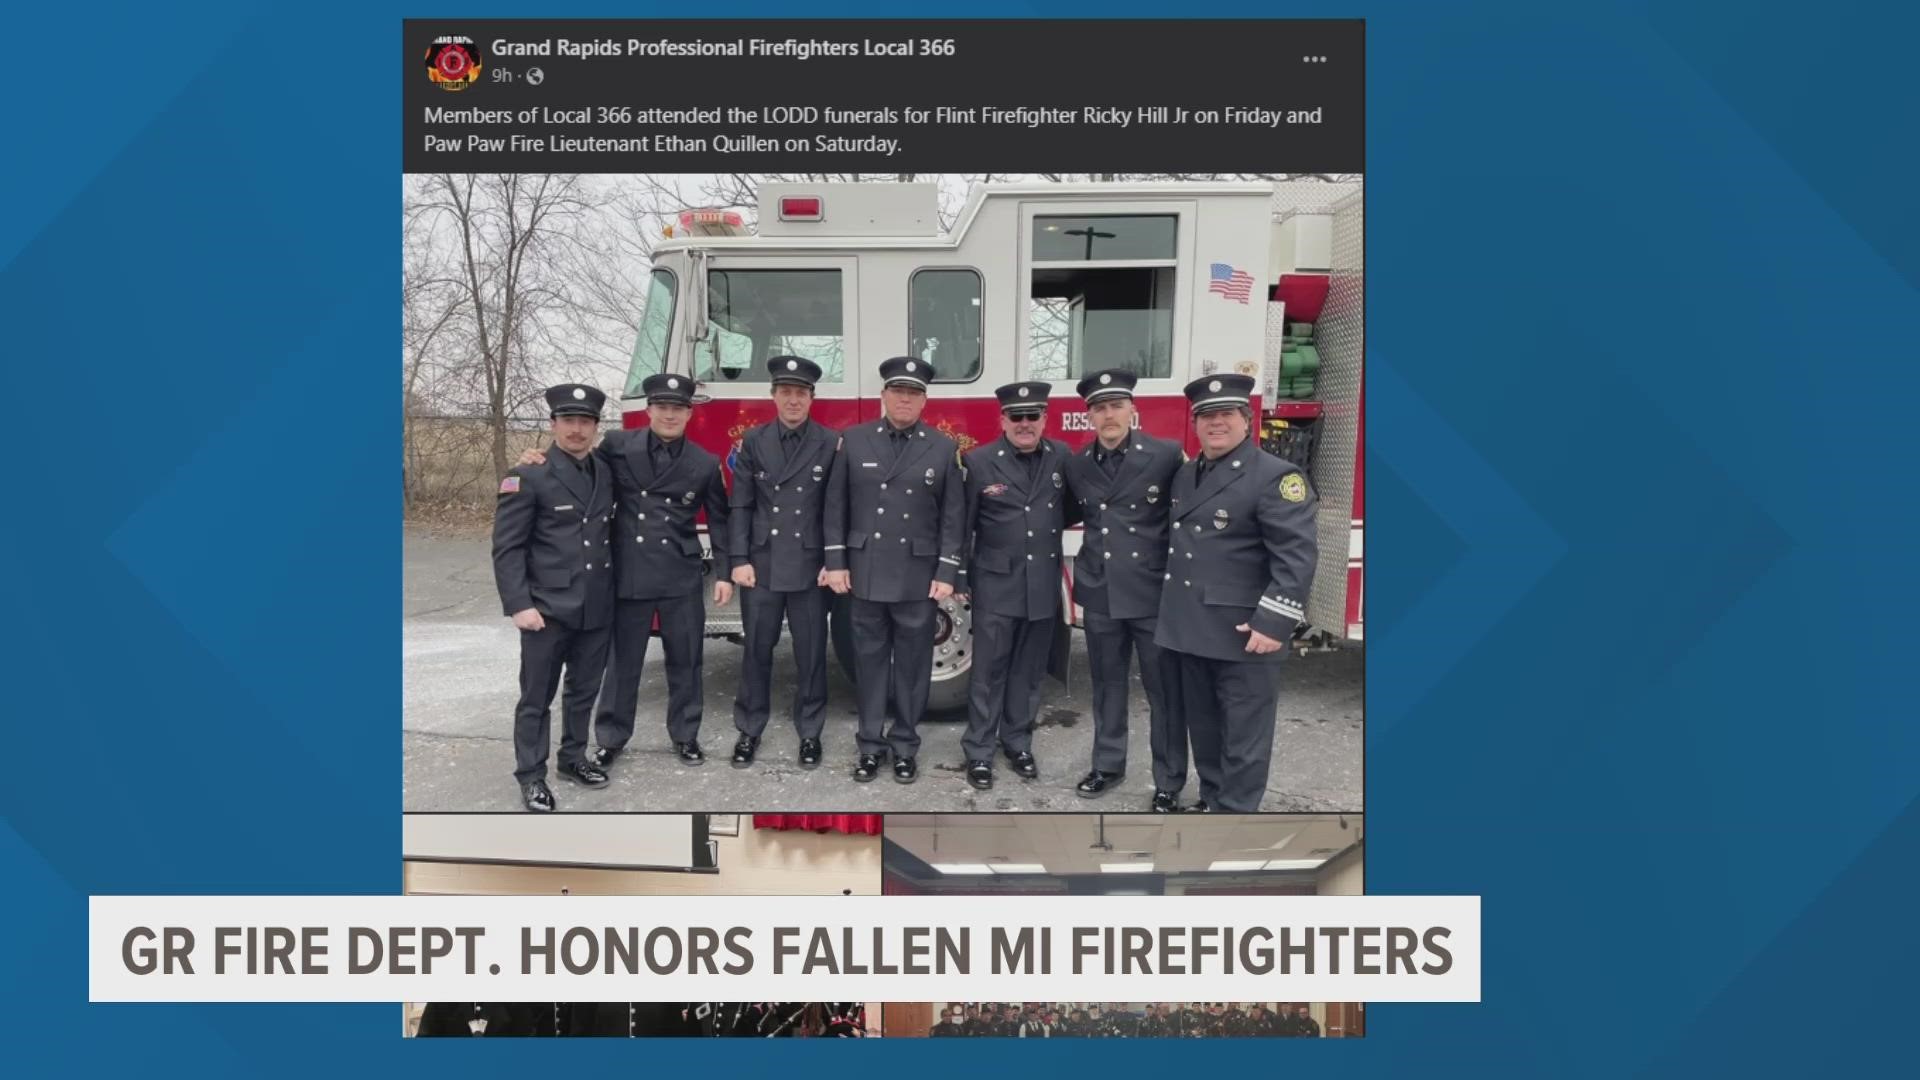 Friends, colleagues and family members attended funeral services this weekend for the 2 Michigan firefighters killed in separate incidents in the line of duty.